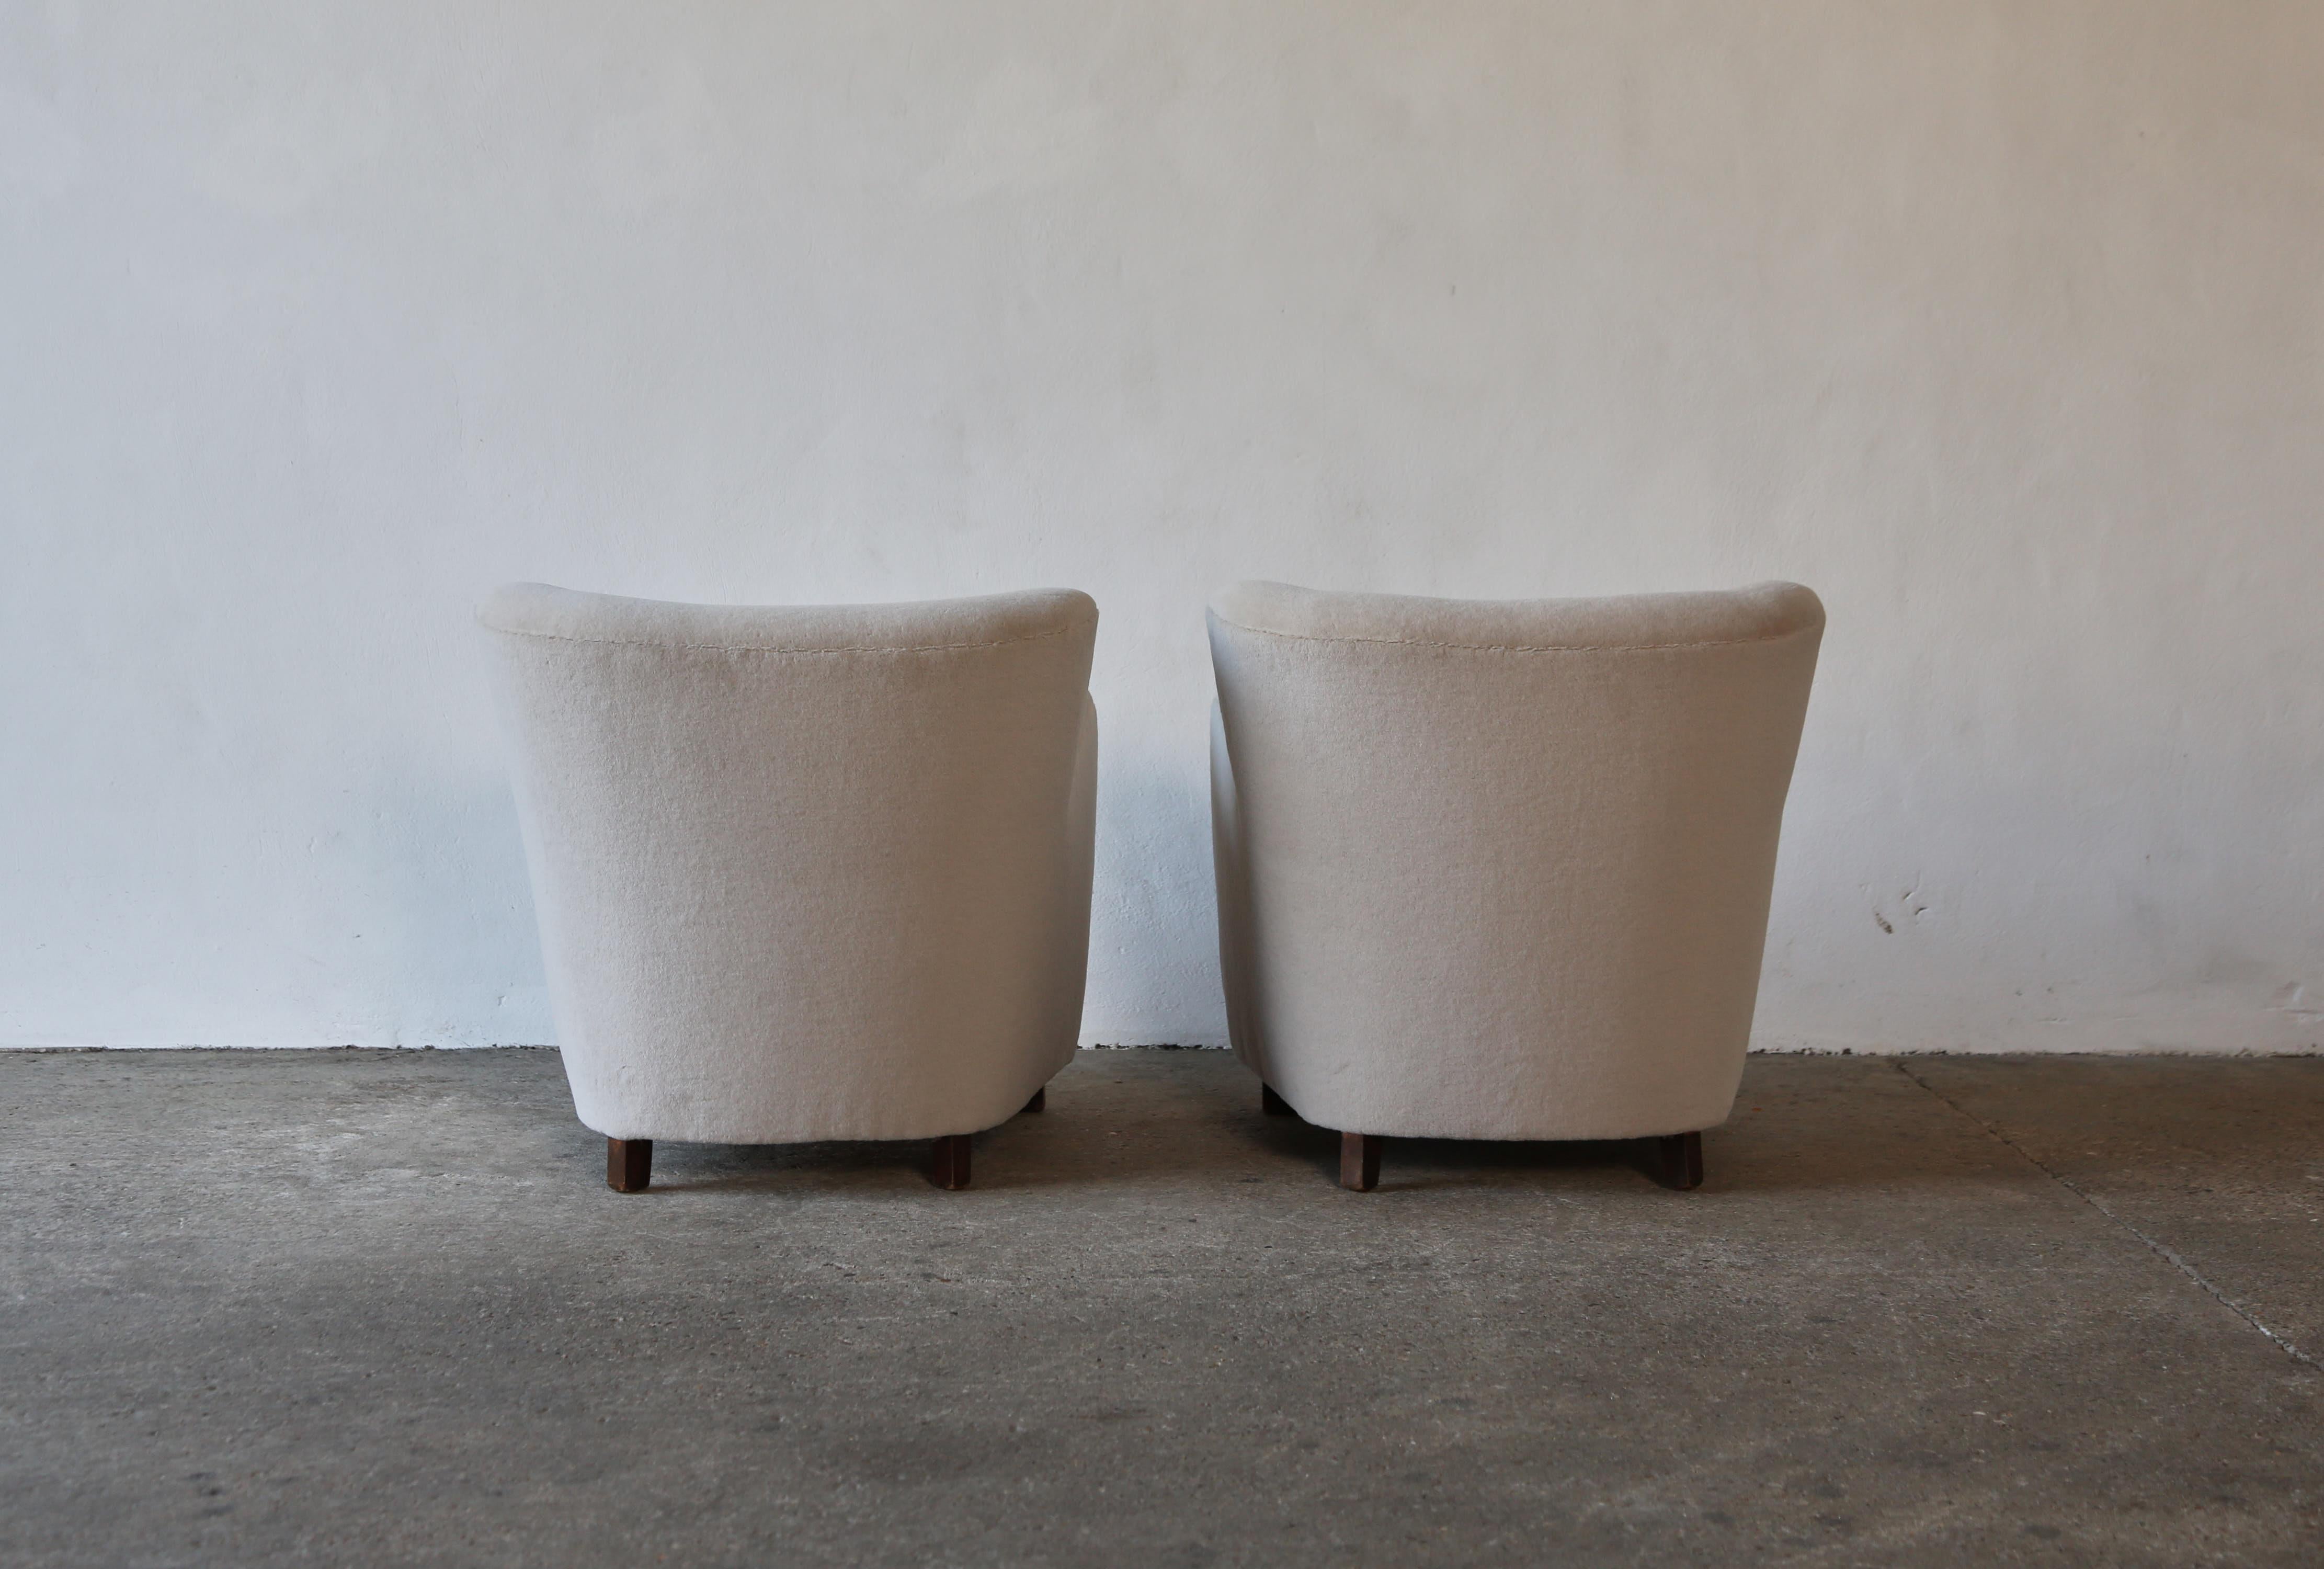 Scandinavian Modern Pair of Arm Chairs, Denmark, 1940s, Newly Upholstered in Pure Alpaca